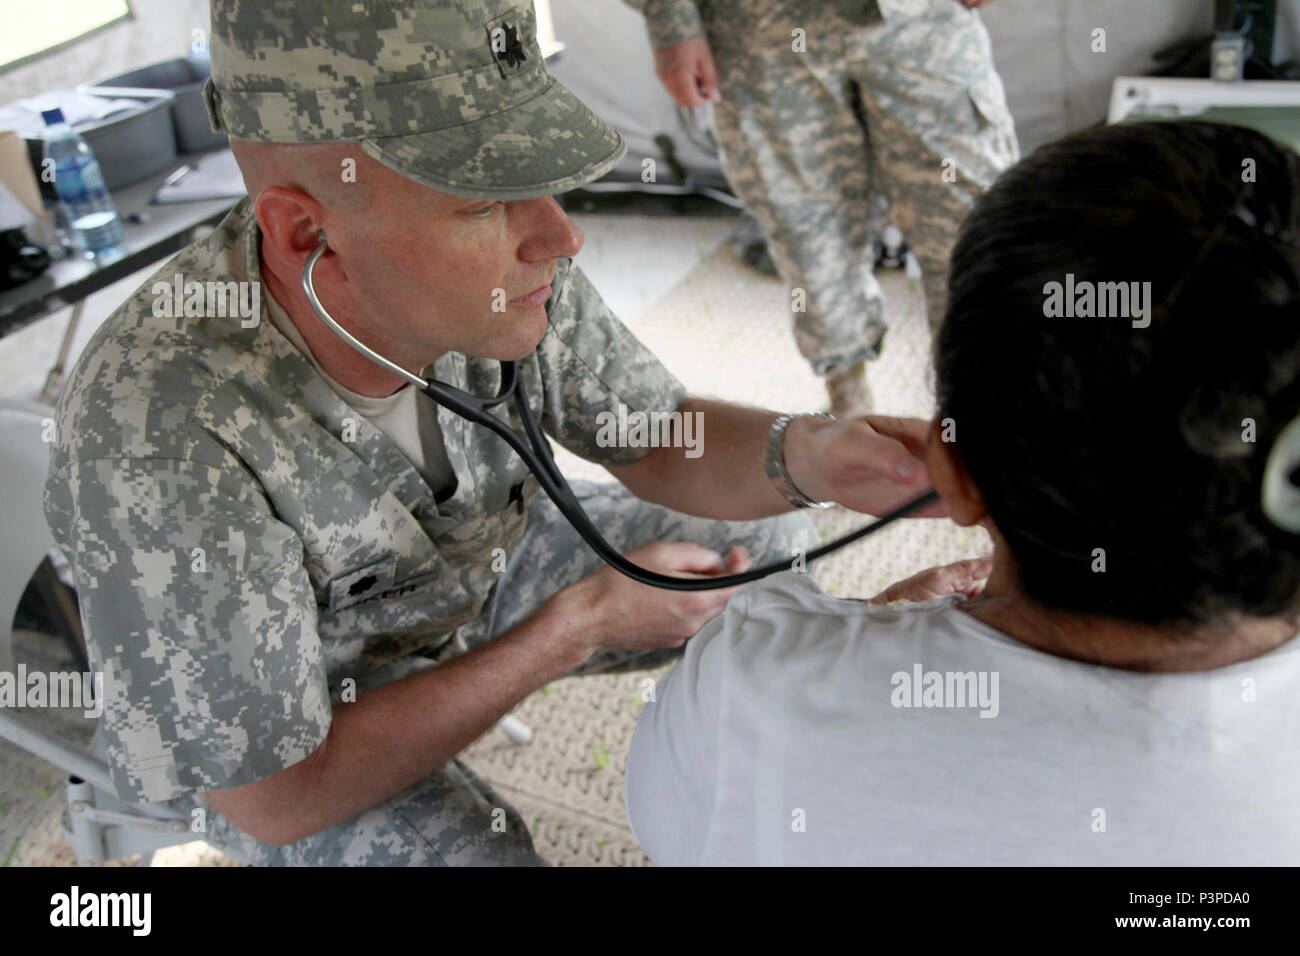 U.S. Army Lt. Col. Derrick Kooker, with the Wyoming National Guard Medical Detachment, listens to the heart beat of a Belizean local during a medical readiness event held in San Ignacio, Belize,  May 08, 2017. This is the second of three medical events that are scheduled to take place during Beyond the Horizon 2017. BTH 2017, a U.S. Southern Command-sponsored, Army South-led exercise designed to provide humanitarian and engineering services to communities in need, demonstrating U.S. support for Belize. Stock Photo